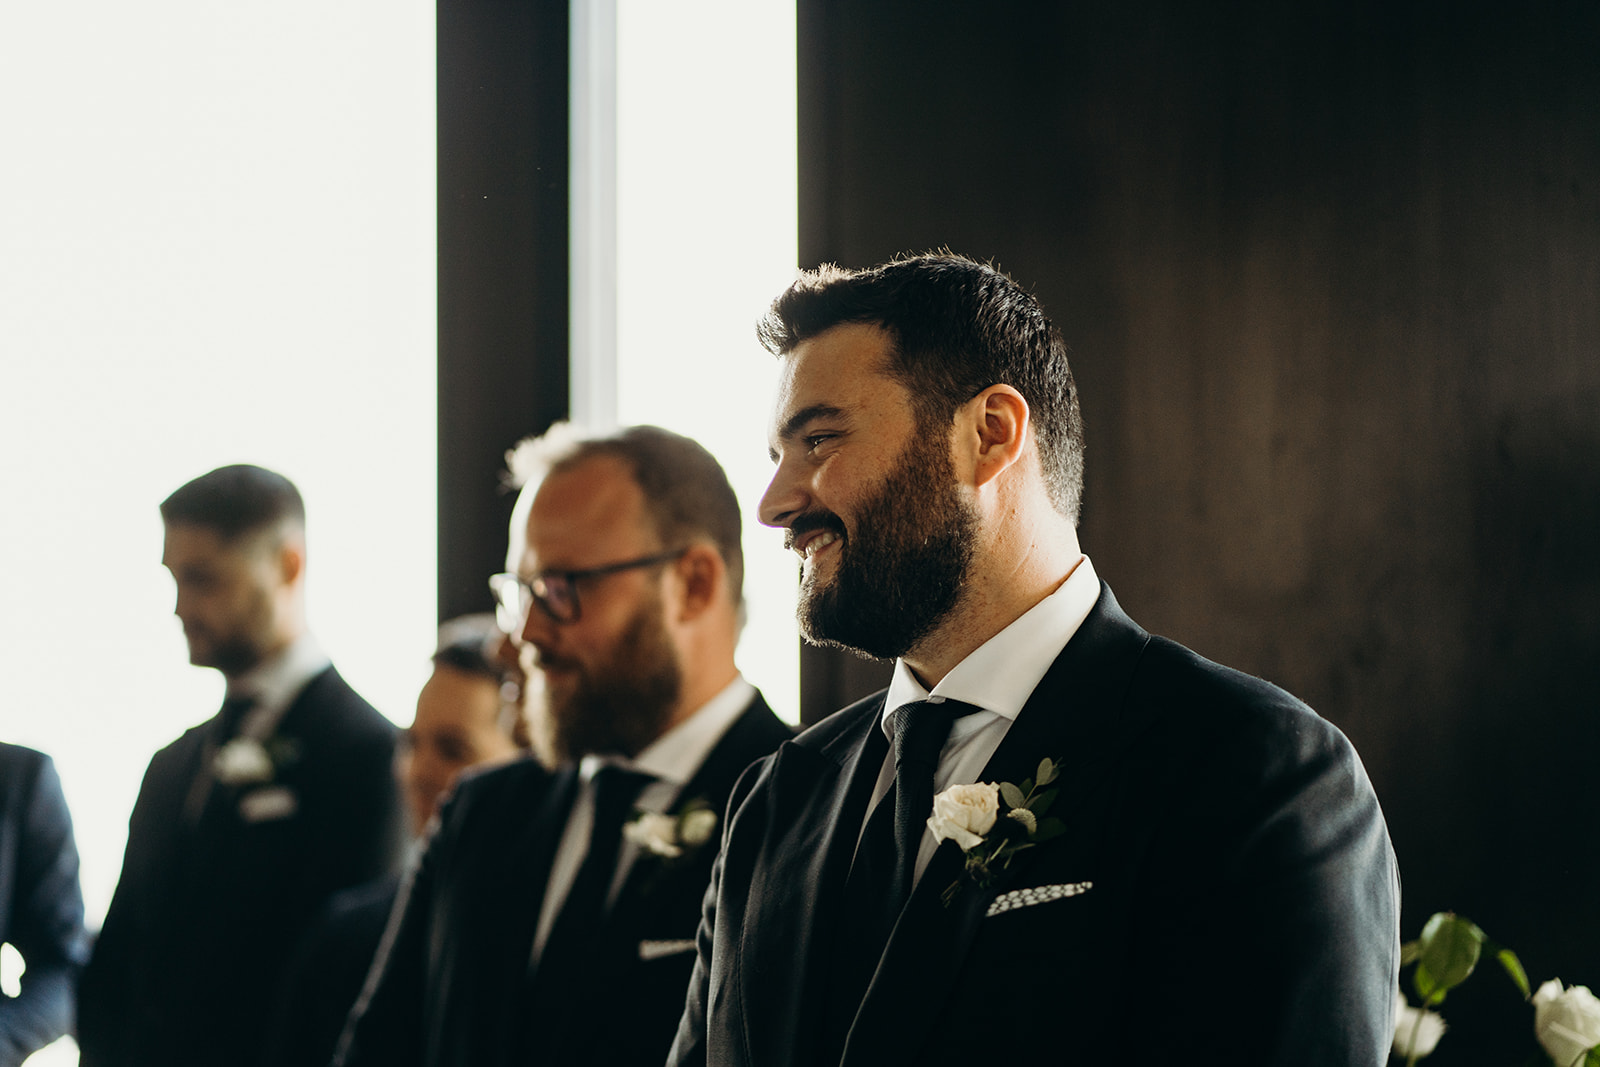 A man in a tux smiling at someone.